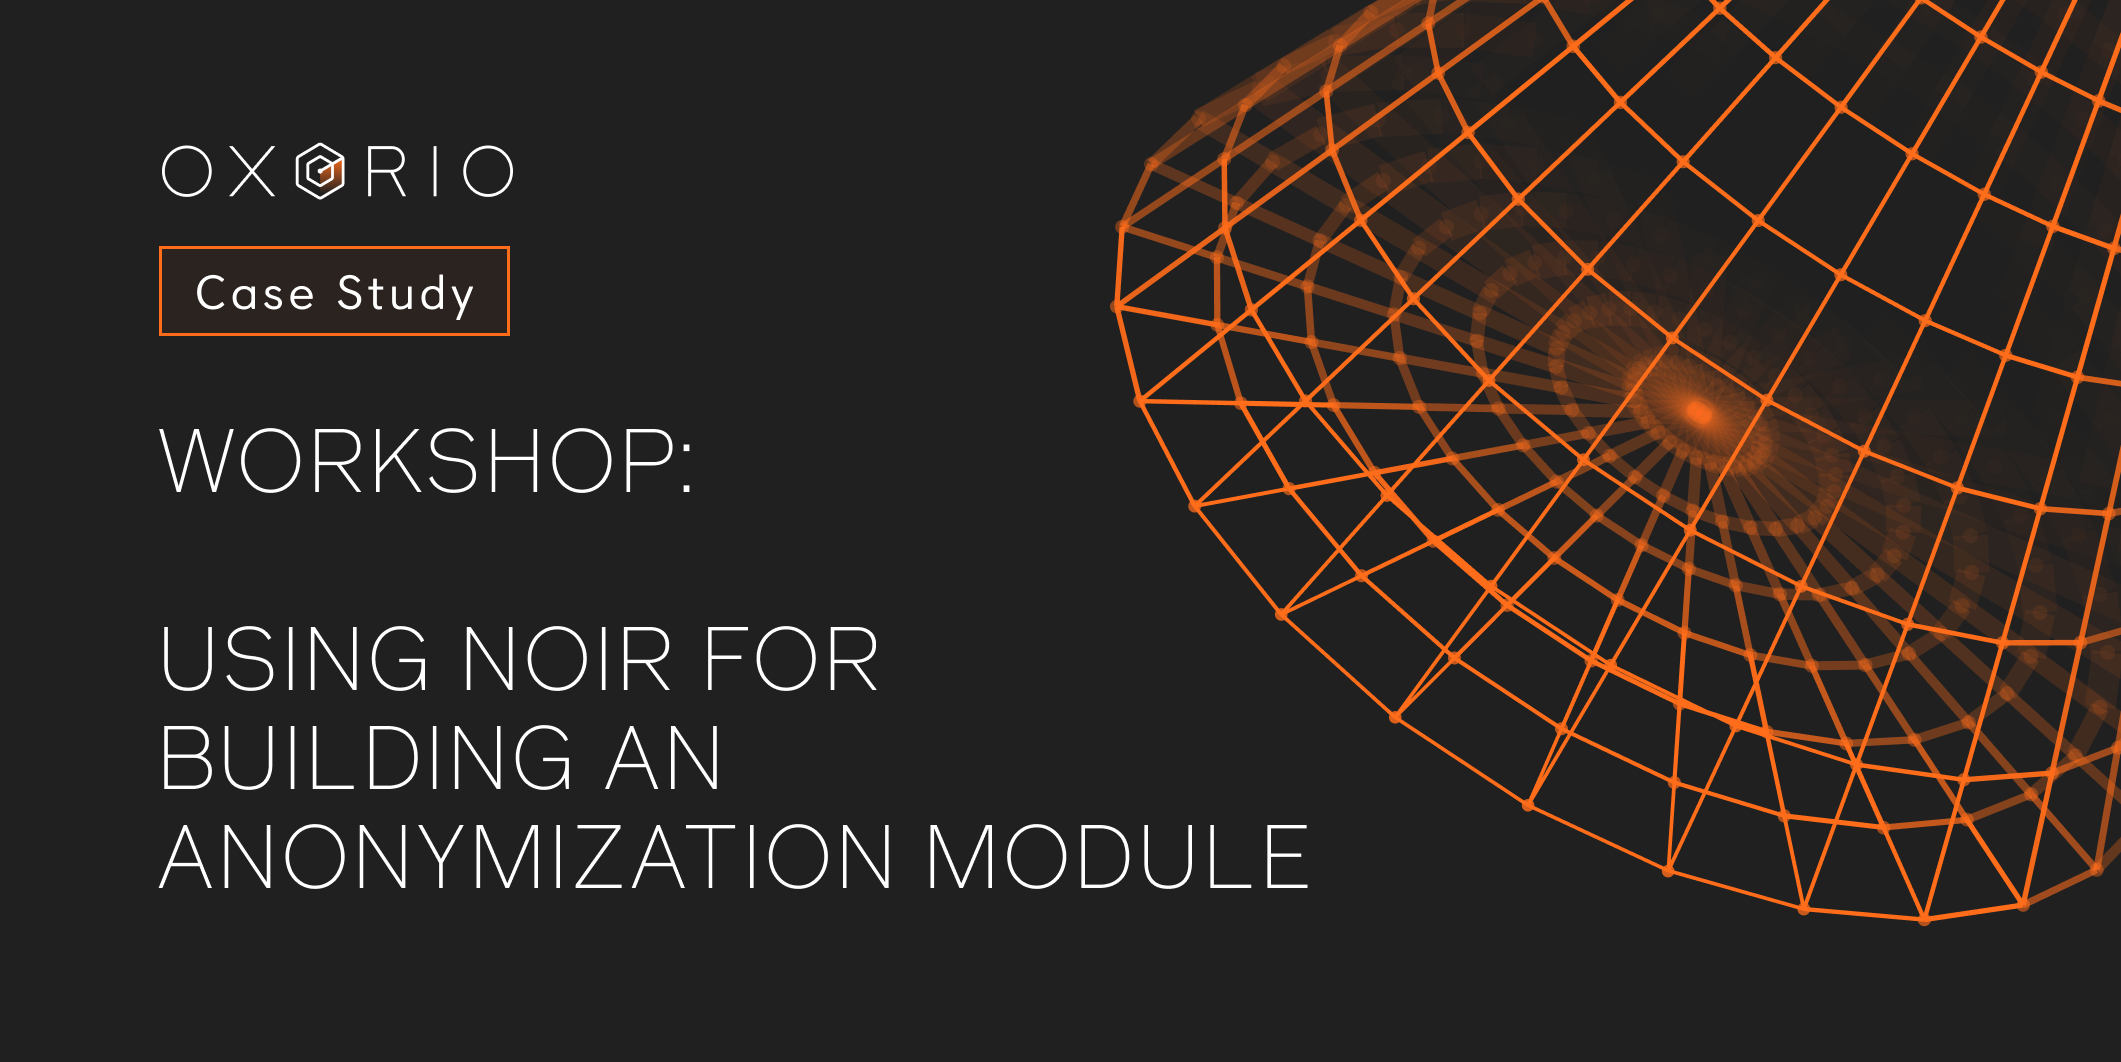 Explore the hands-on practicality of the Safe Anonymization Module (SAM) and the unique advantages of the Noir DSL in anonymizing transaction data. This workshop details generating Zero-Knowledge Proofs (ZKP) and managing anonymous transactions efficiently using SAM on the Safe network